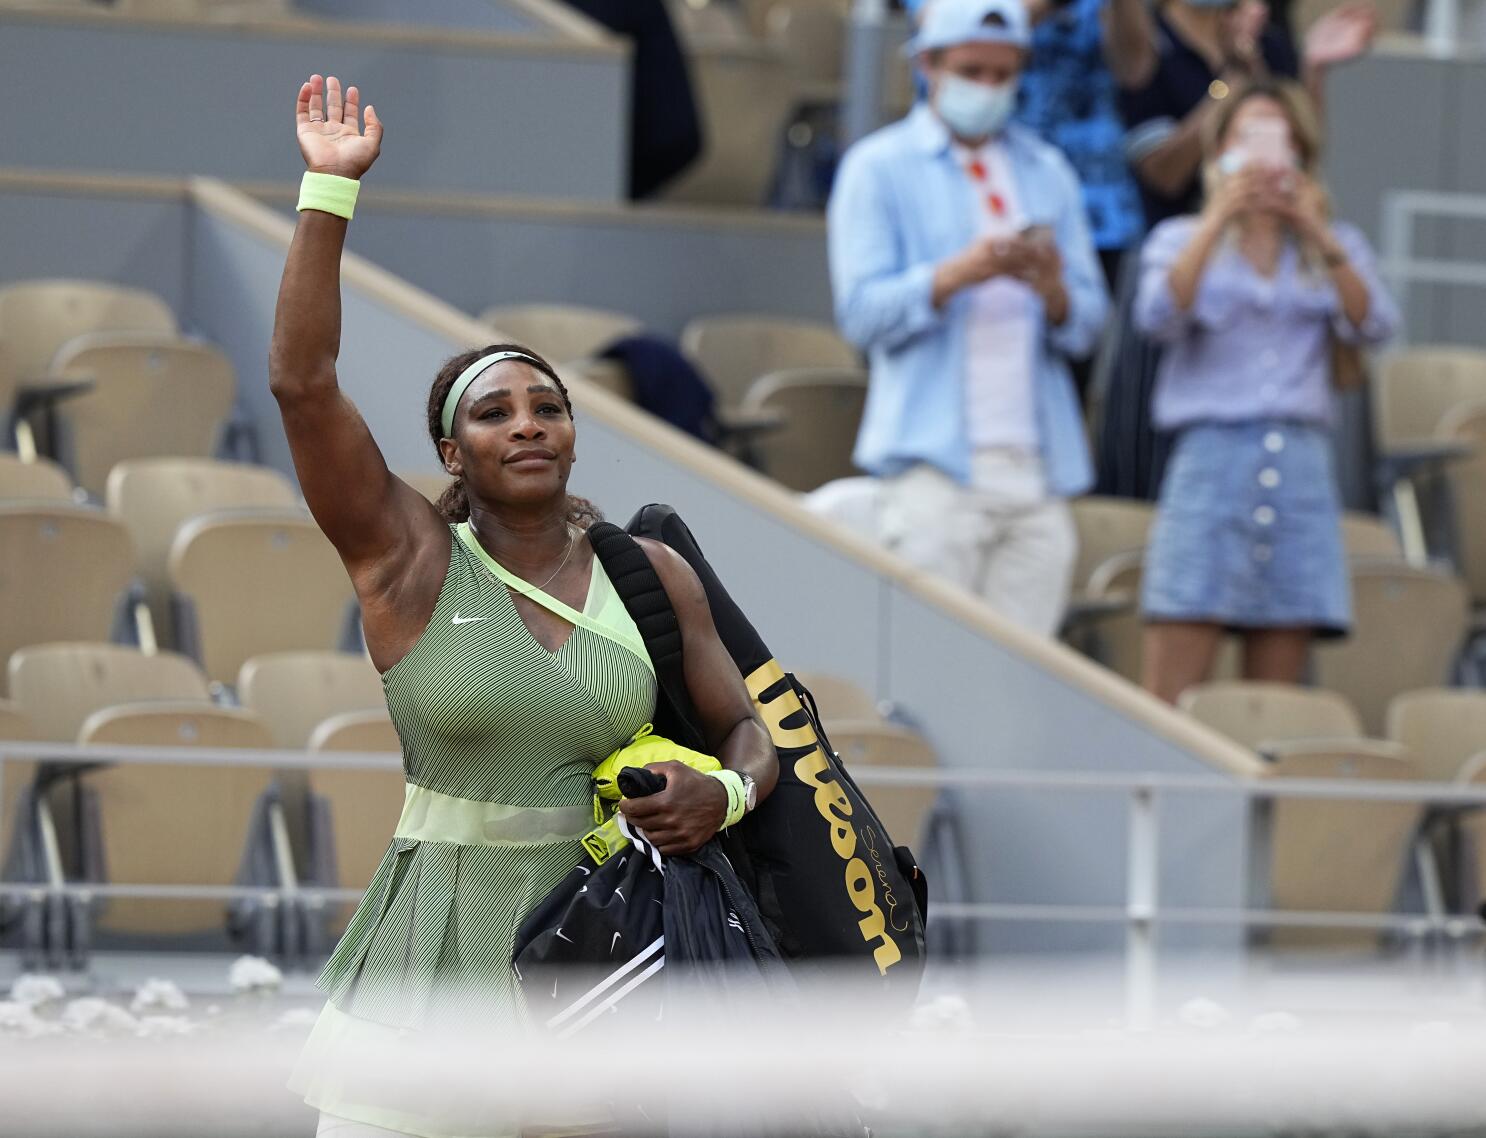 Serena Williams talks to crowd in French after winning opening match at  French Open